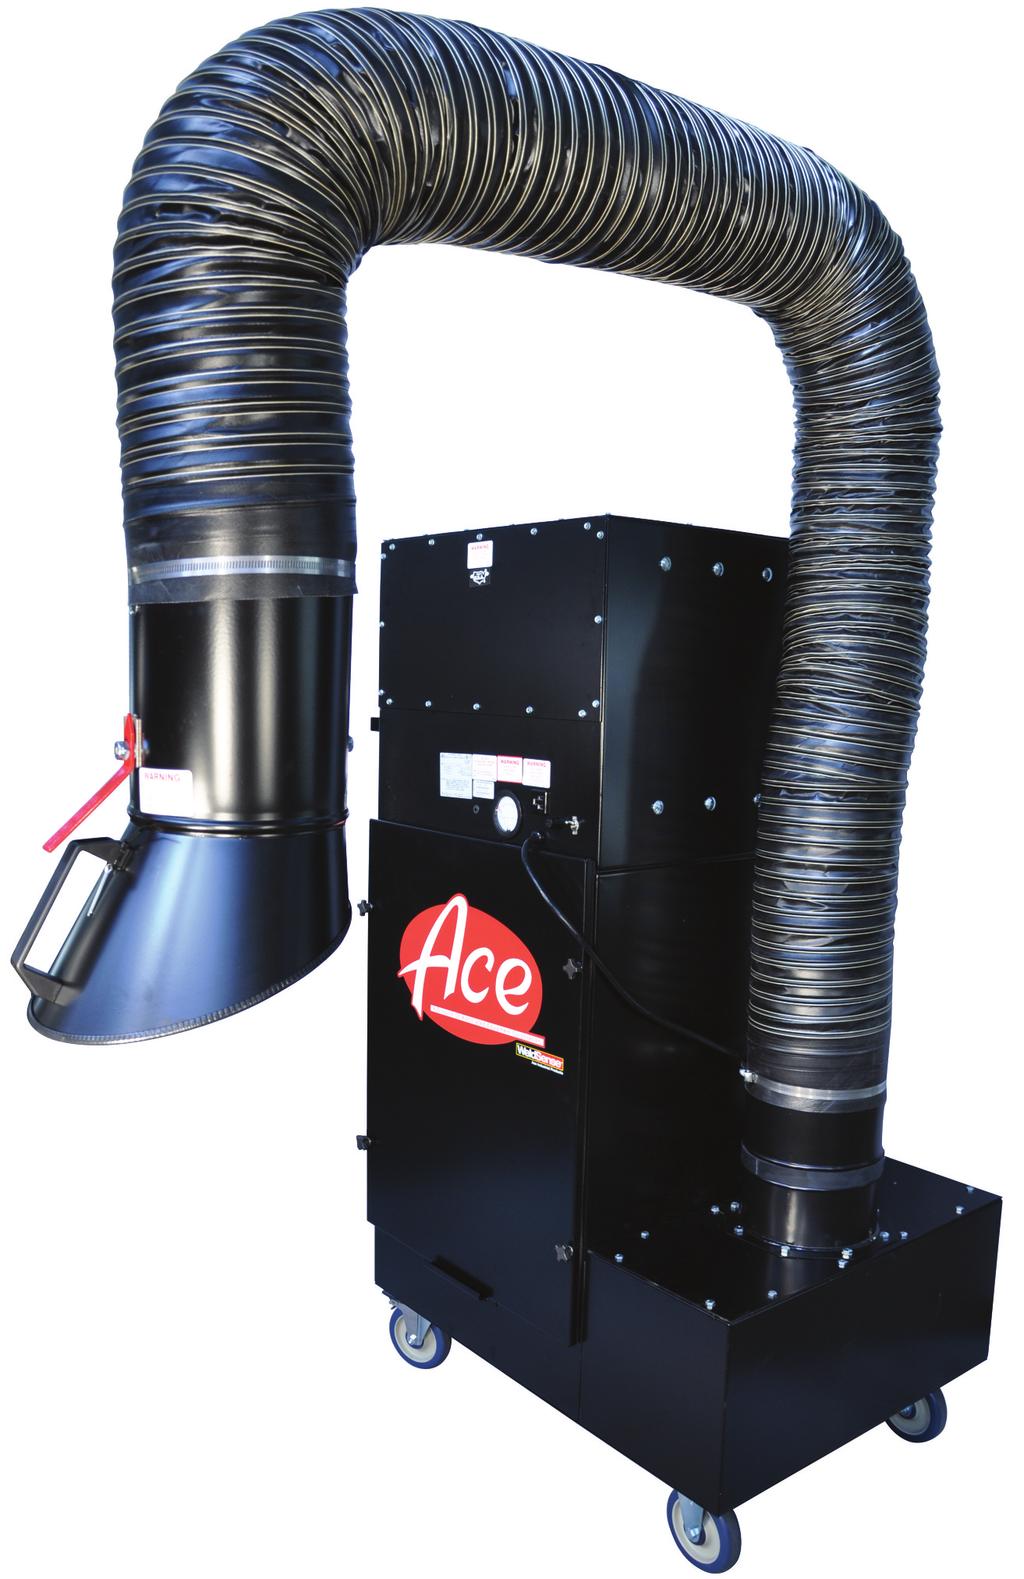 73-801 Powerful mobile fume extractor with a compact, space-saving design. Designed for high volume production welding, this unit is effective for all types of welding materials and processes.